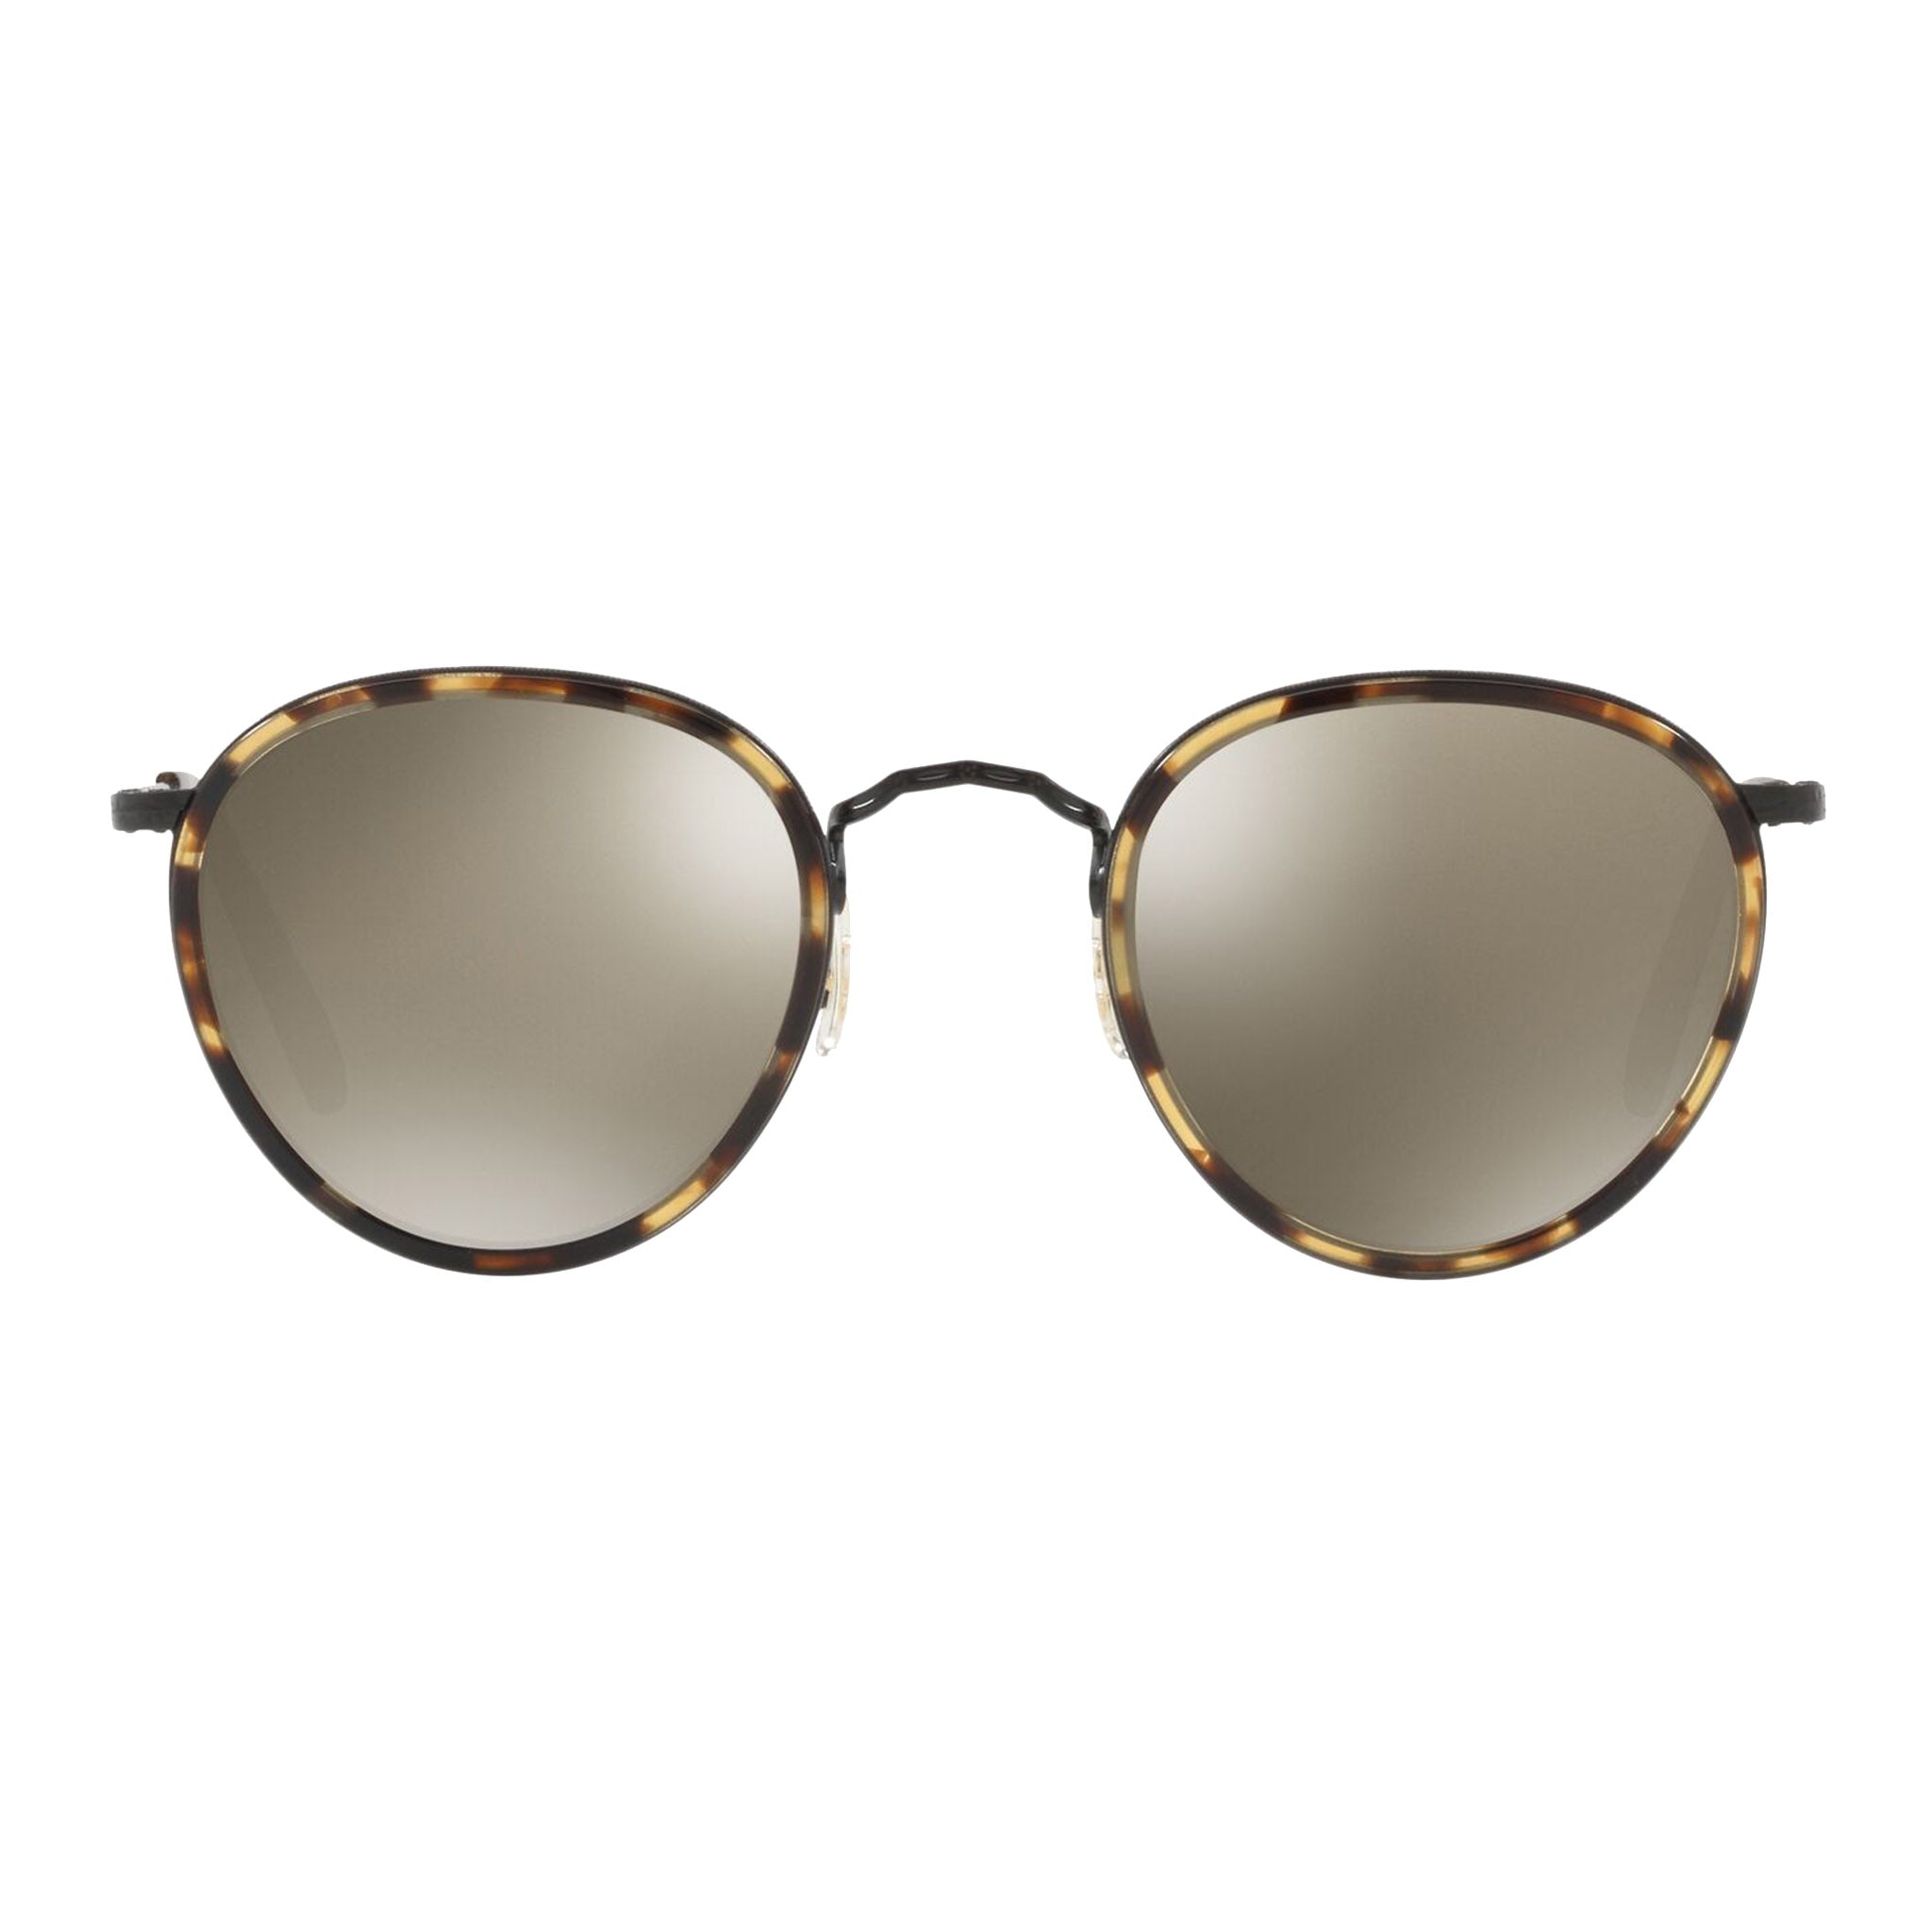 Oliver Peoples MP-2 Sun Hickory-Tortoise Black with Dark Grey Mirror Gold Sunglasses